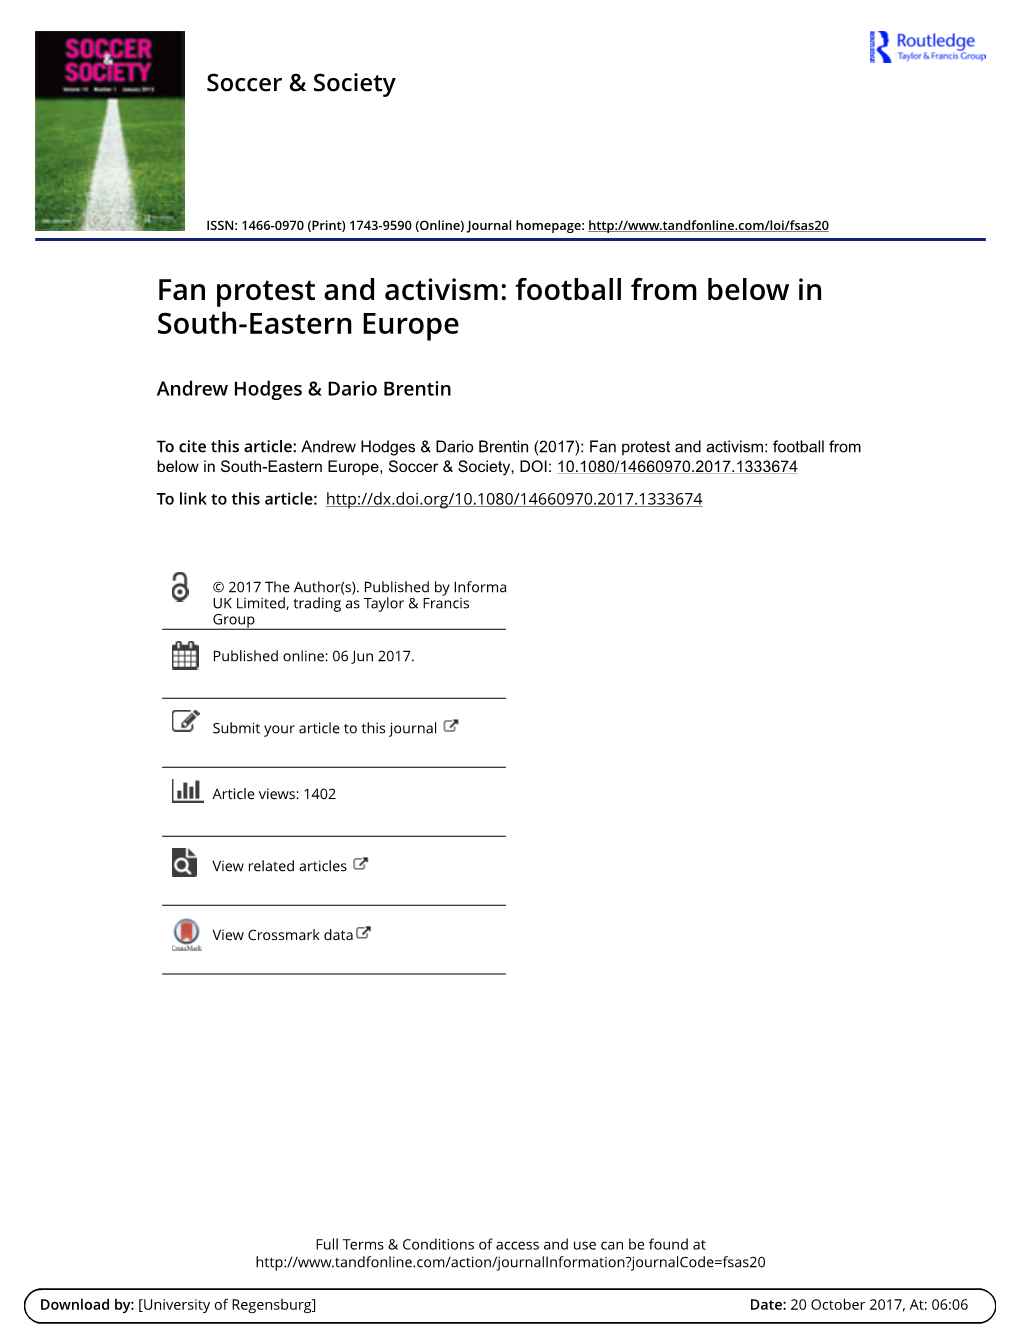 Fan Protest and Activism: Football from Below in South-Eastern Europe